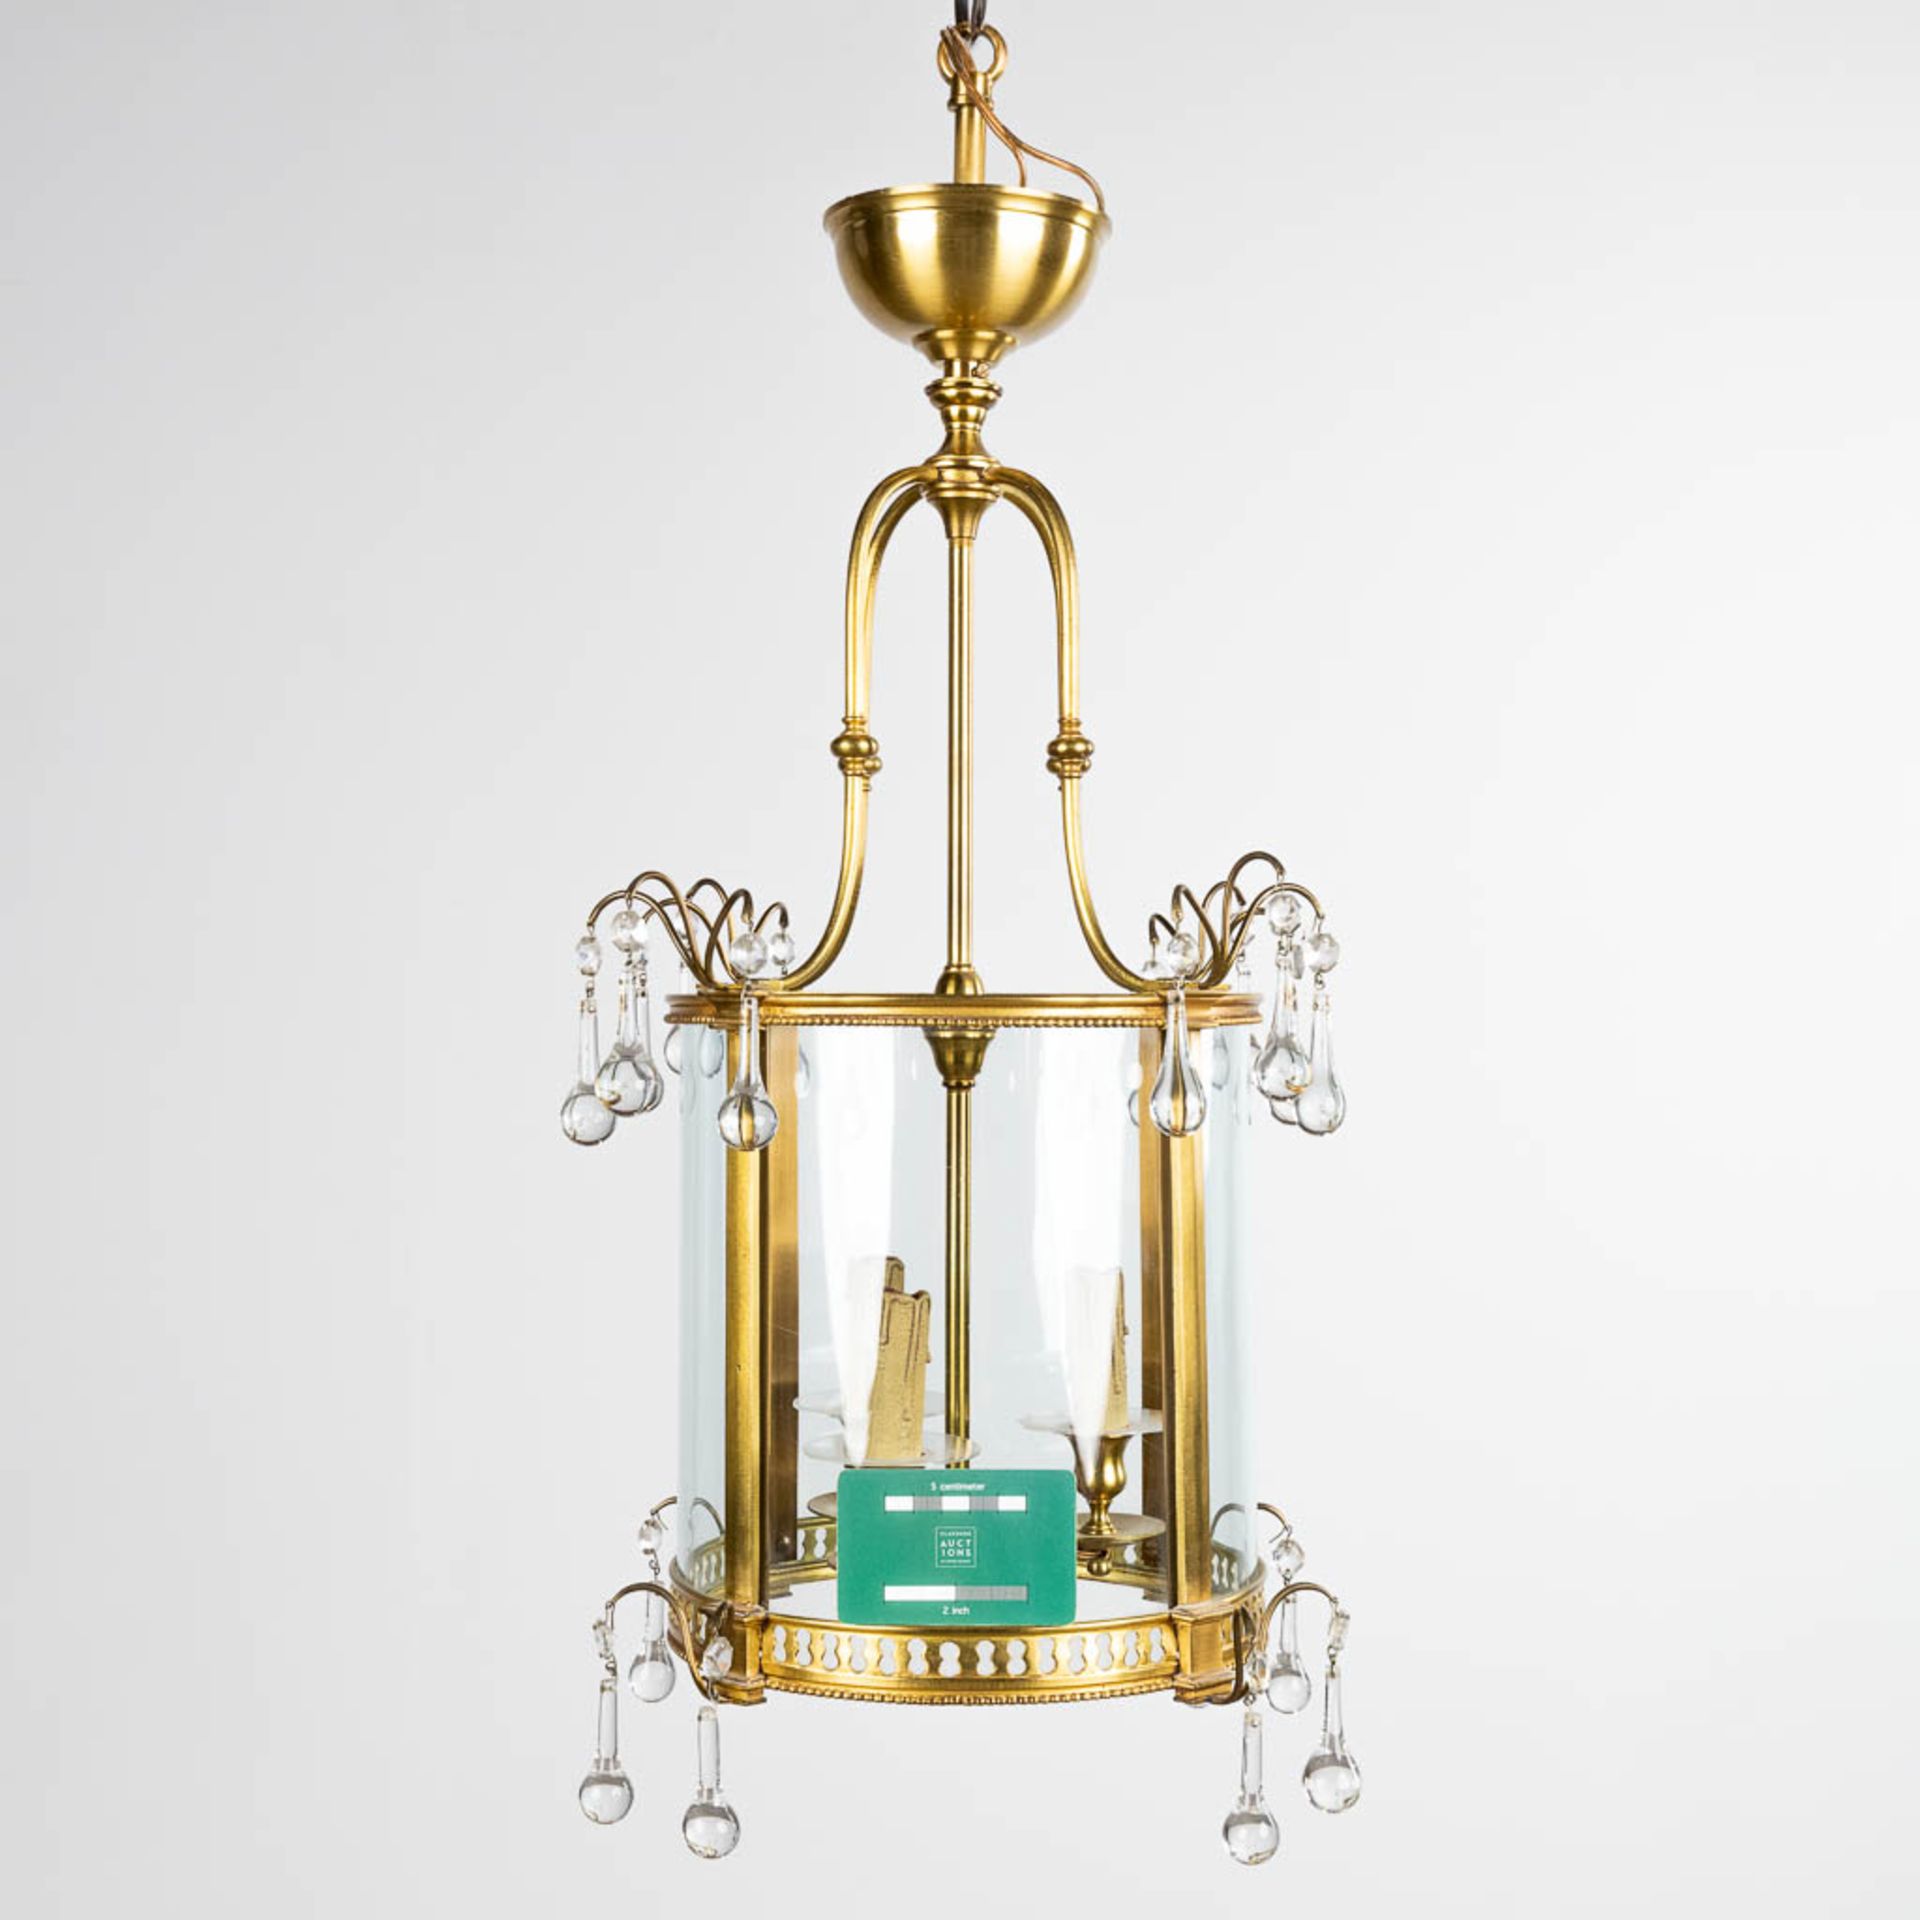 A hall lamp made of brass and glass. Circa 1970. (H: 67 x D: 36 cm) - Image 2 of 9